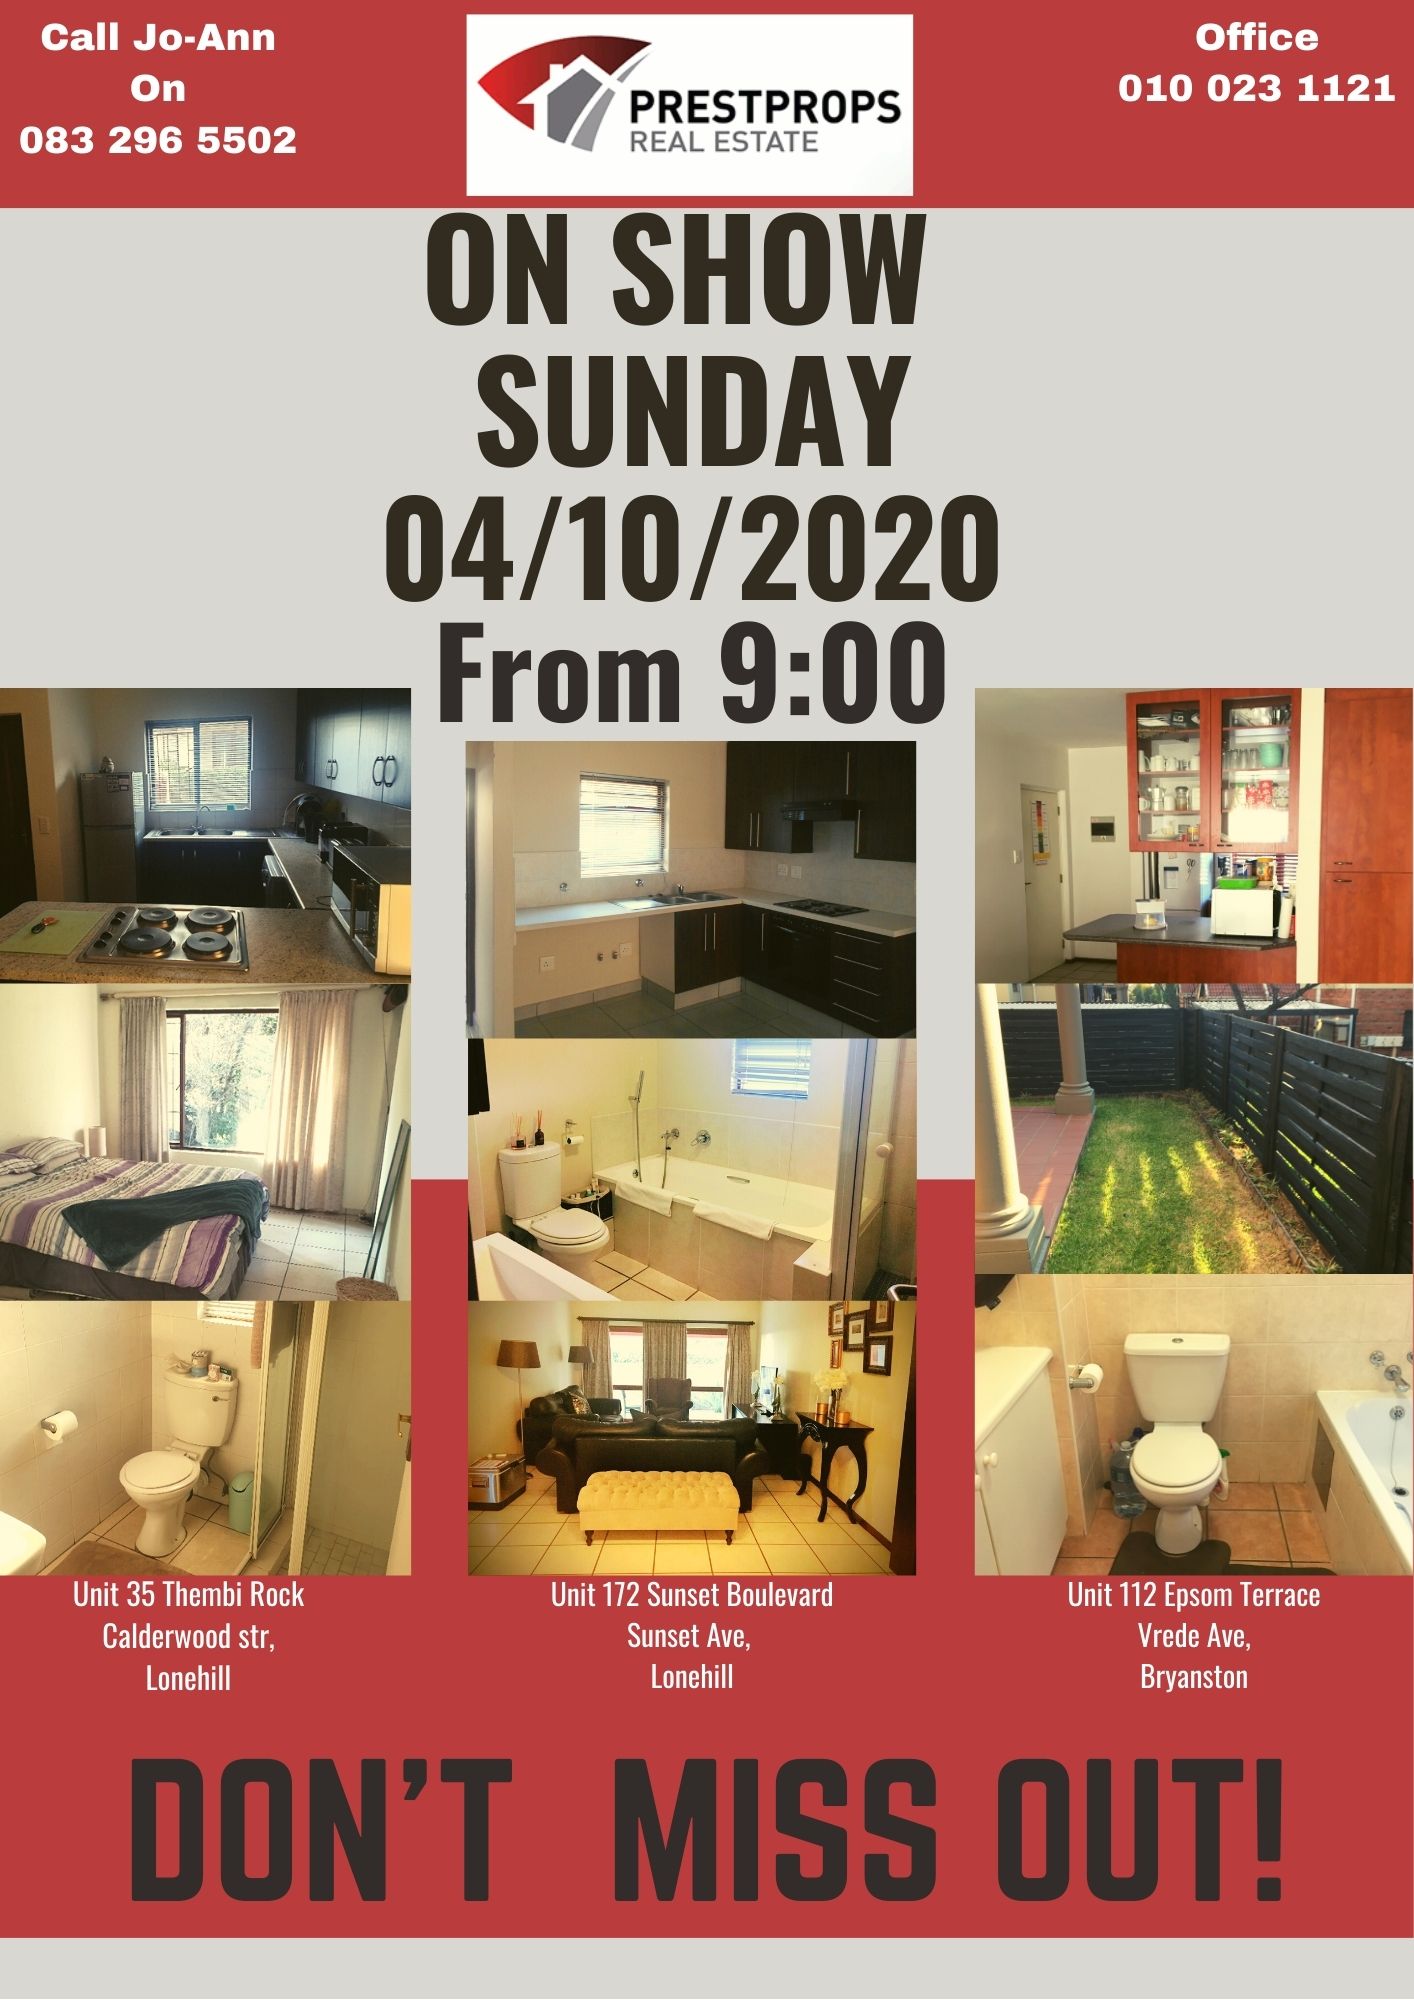 Multiple units on show Sunday 04/10/2020
DON'T MISS OUT!